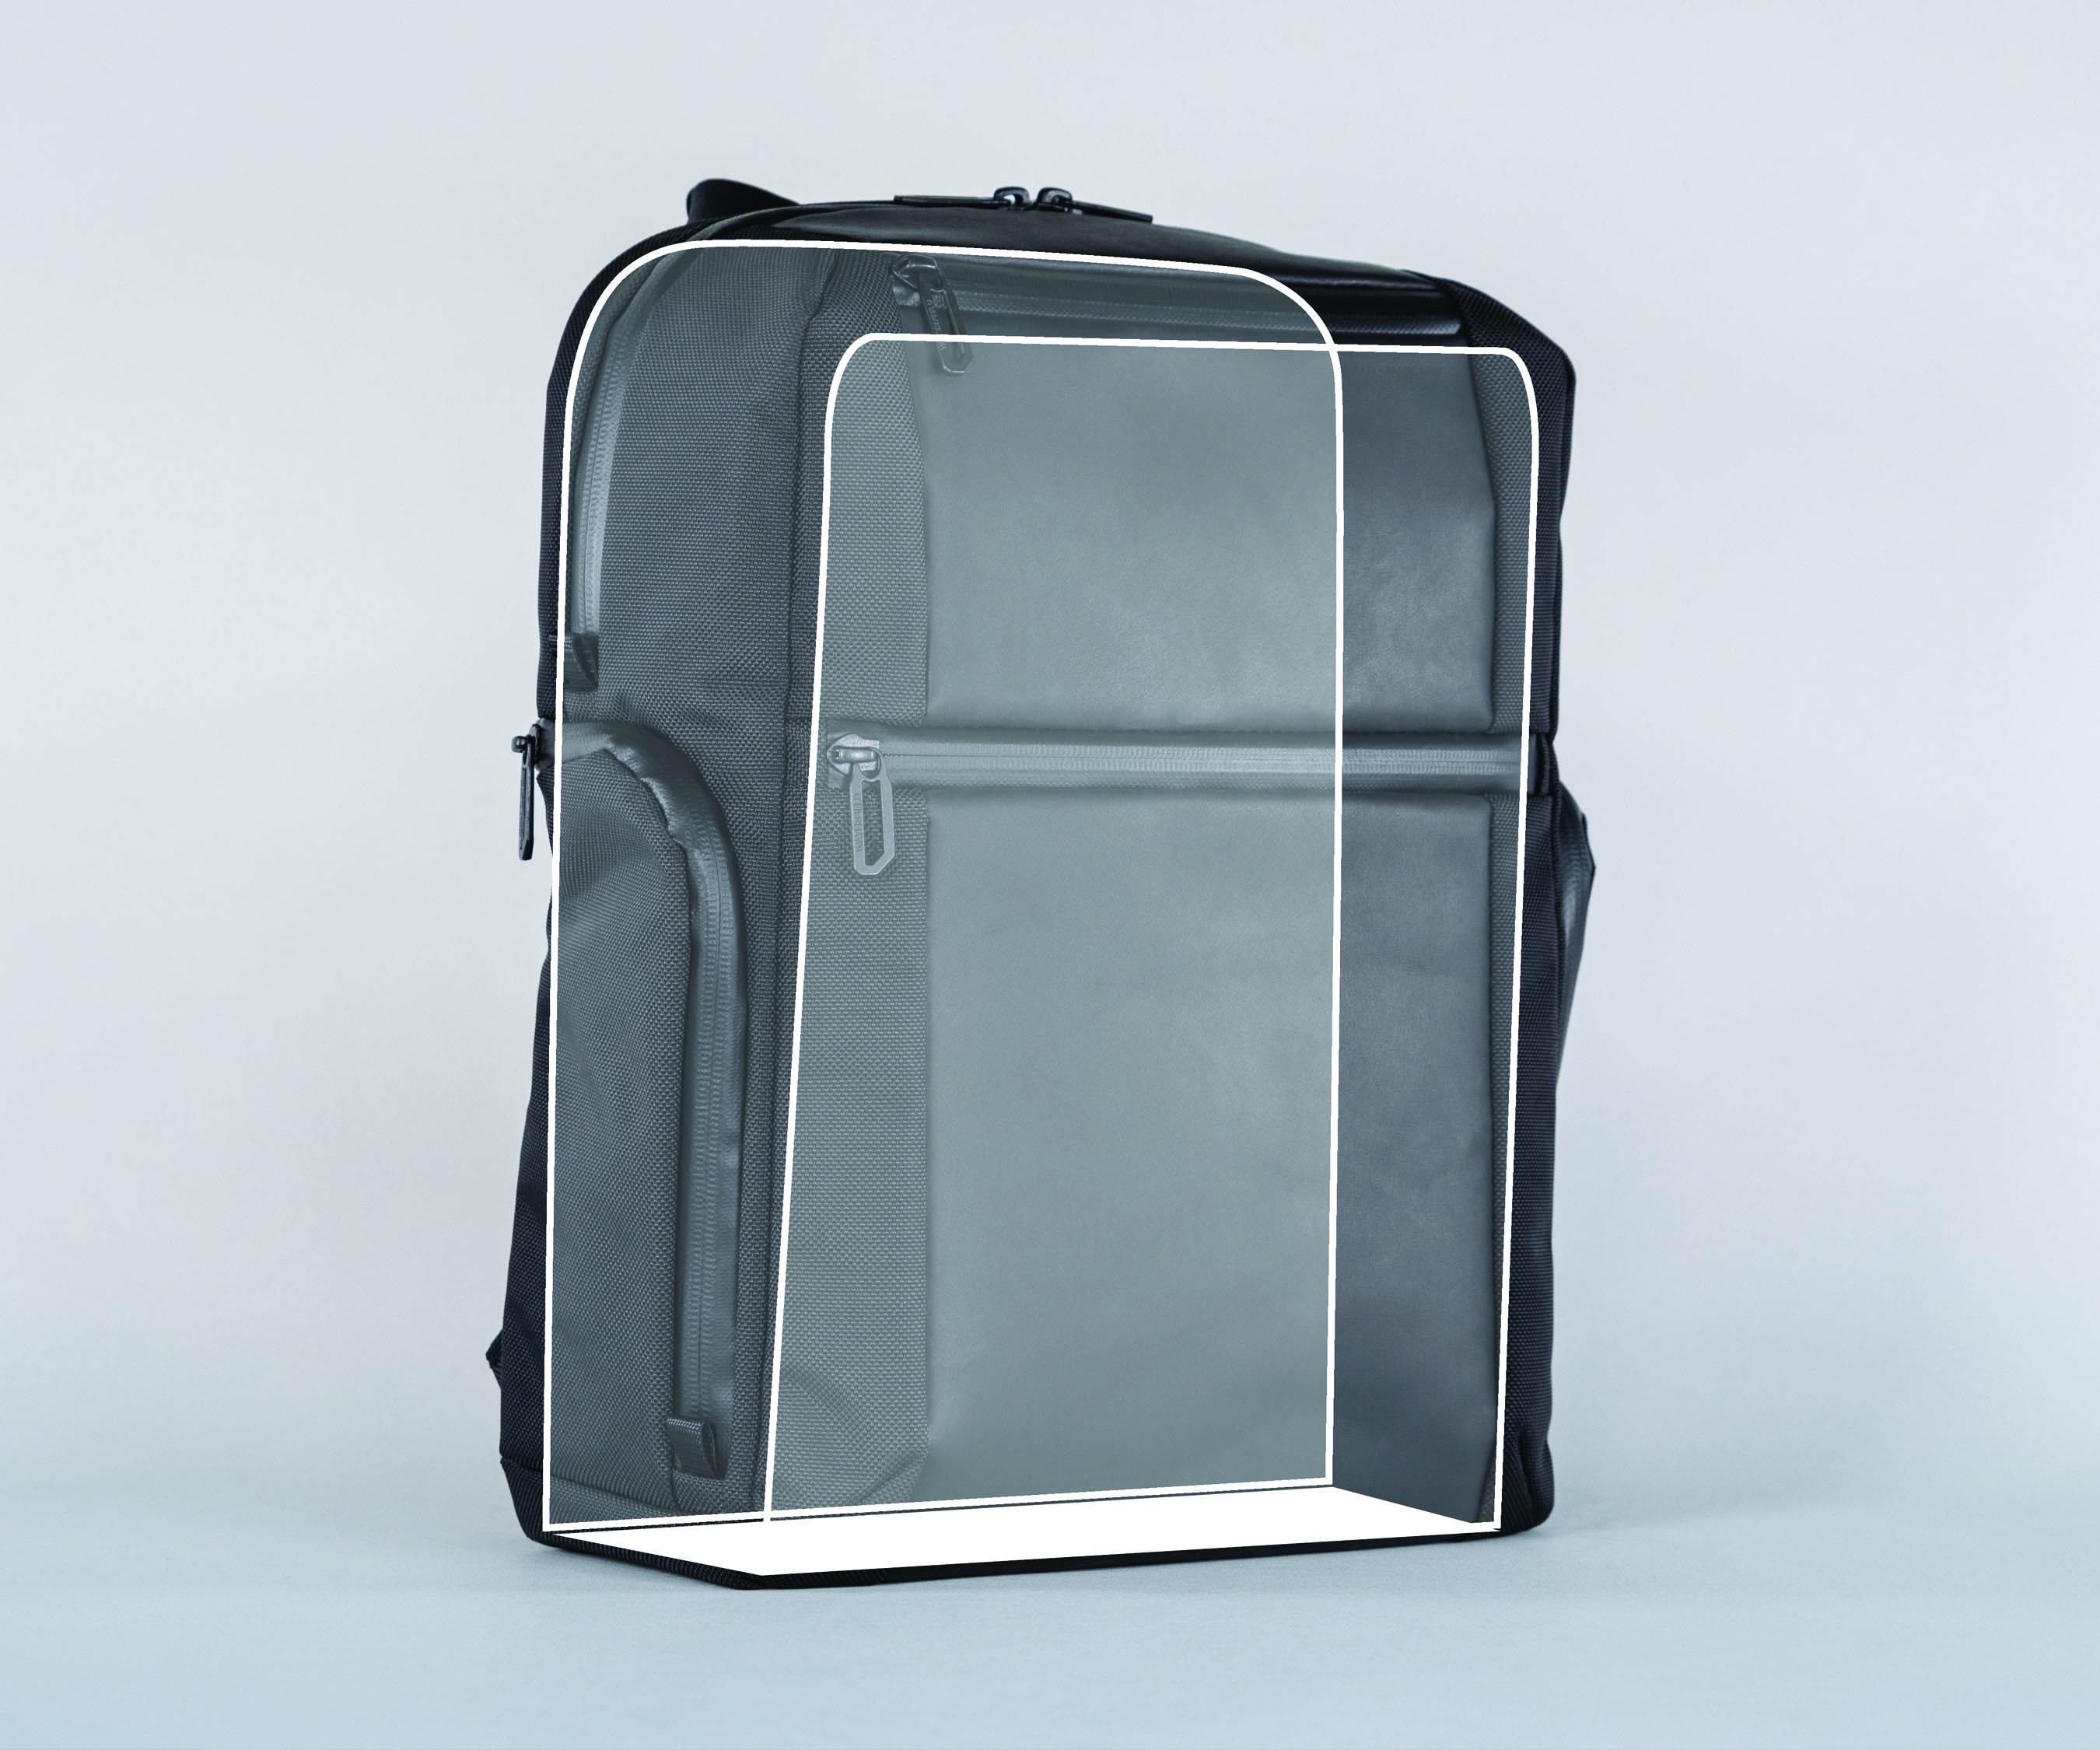 Foam structure protects contents and keeps bag upright